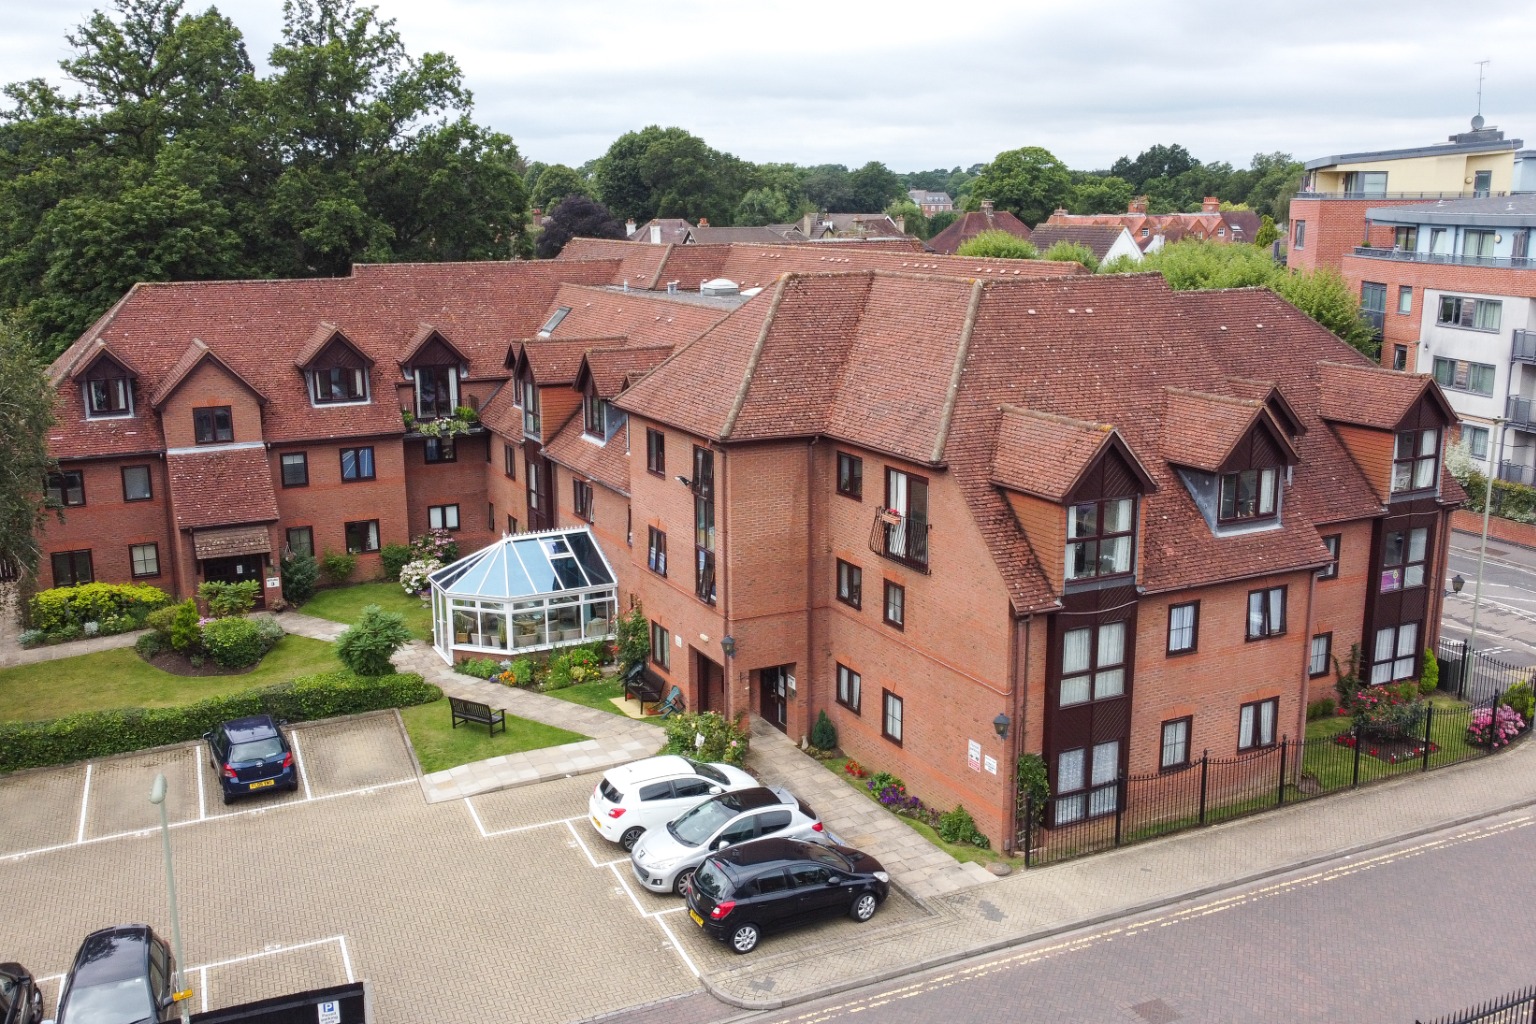 *MARKETED BY CHRIS GRAY*. This is a lovely apartment for the over 60's that is located in the heart of Camberley town centre and just a short walk to the shops and other local amenities. The property will be sold with no chain.